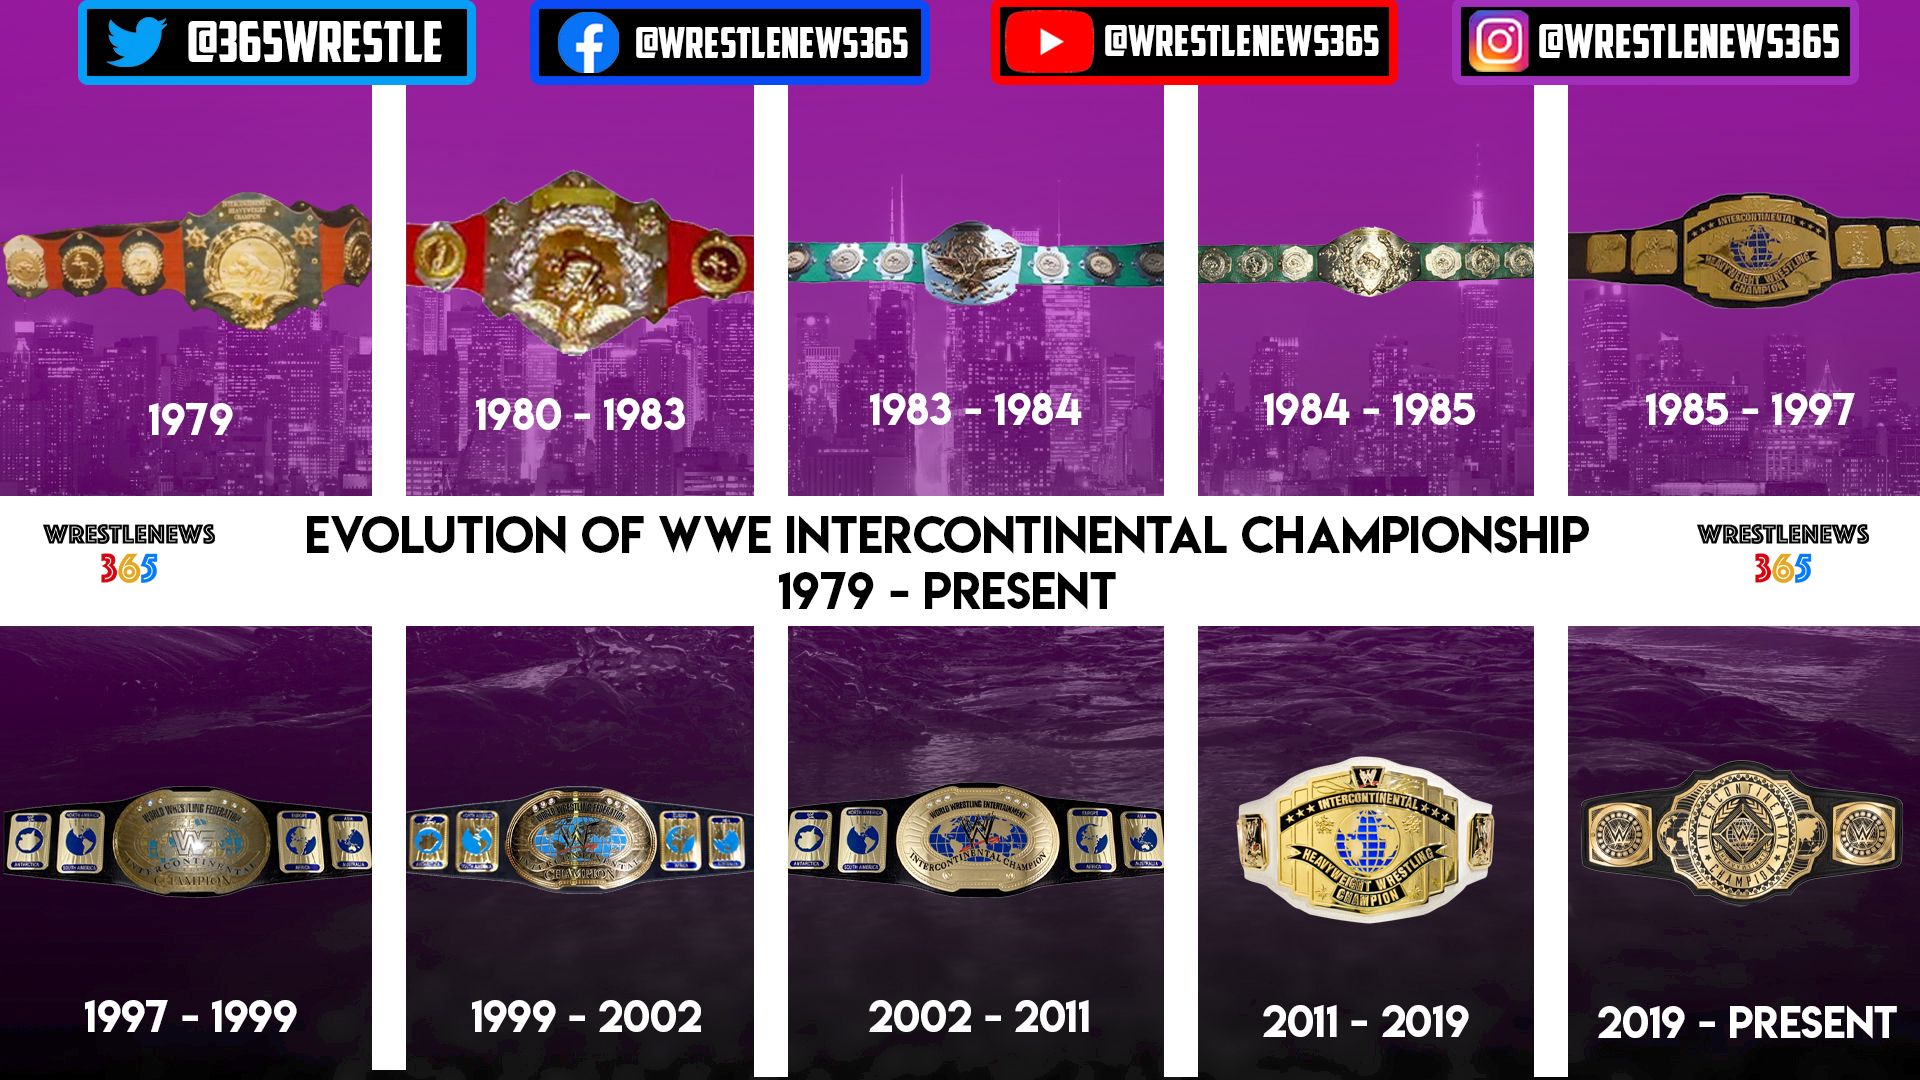 Owen Wrestlenews365 Let S Take A Closer Look At The Evolution Of The Wwe Intercontinental Championship Belt Design What Is Your Favourite Version Of The Wwe Intercontinental Championship What Memories